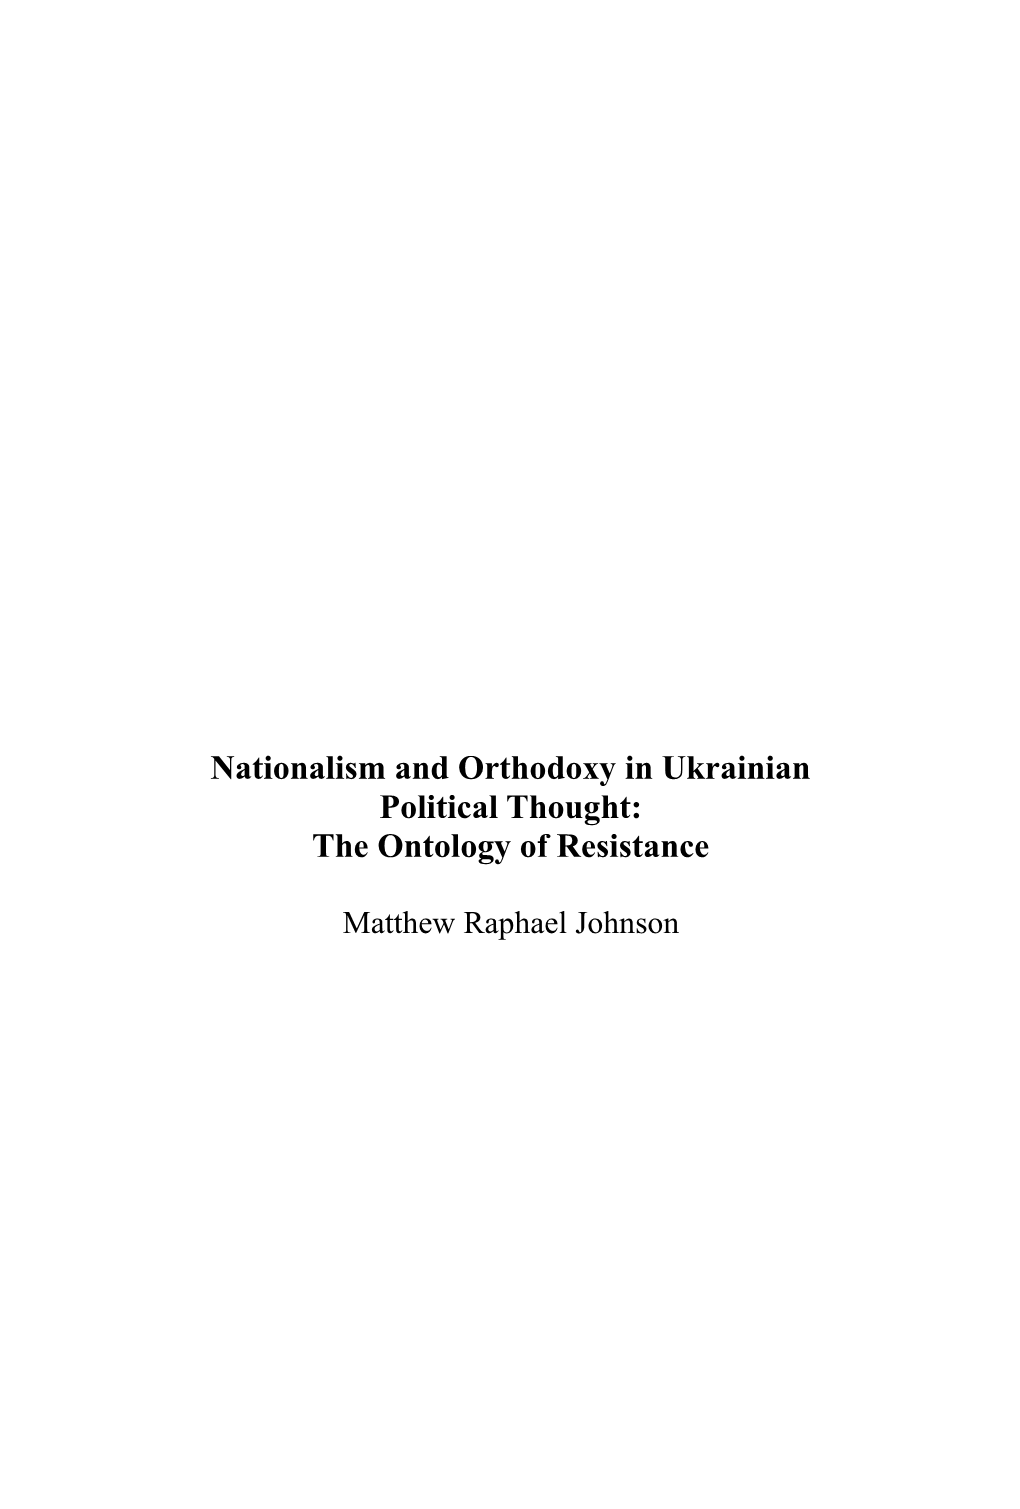 Nationalism and Orthodoxy in Ukrainian Political Thought: the Ontology of Resistance